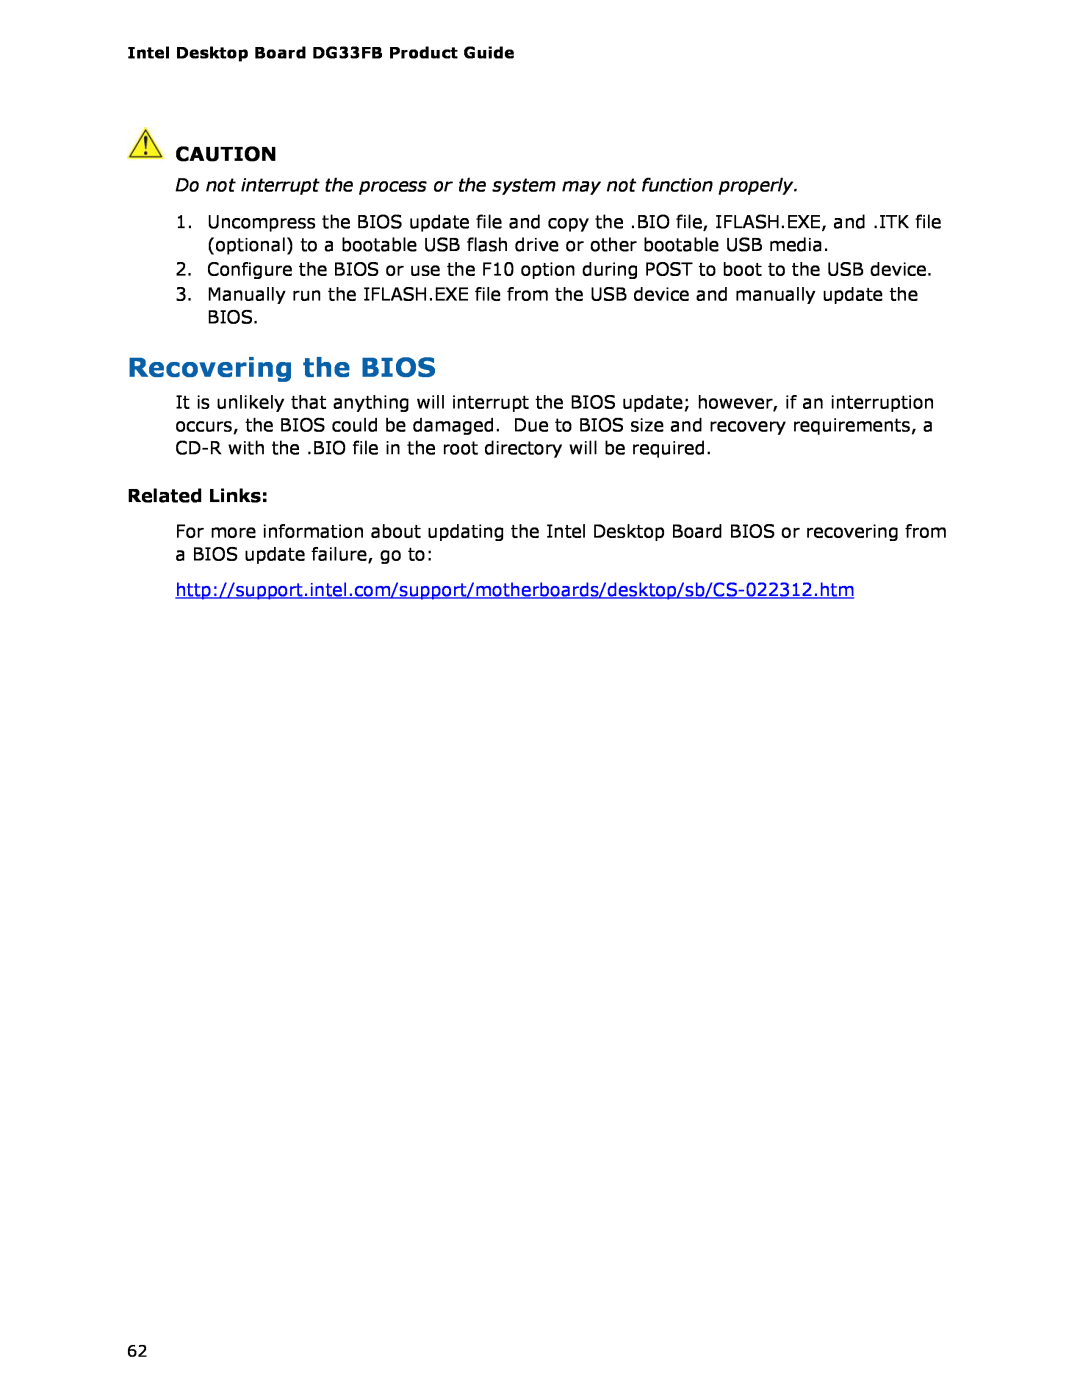 Intel DG33FB manual Recovering the BIOS, Related Links 